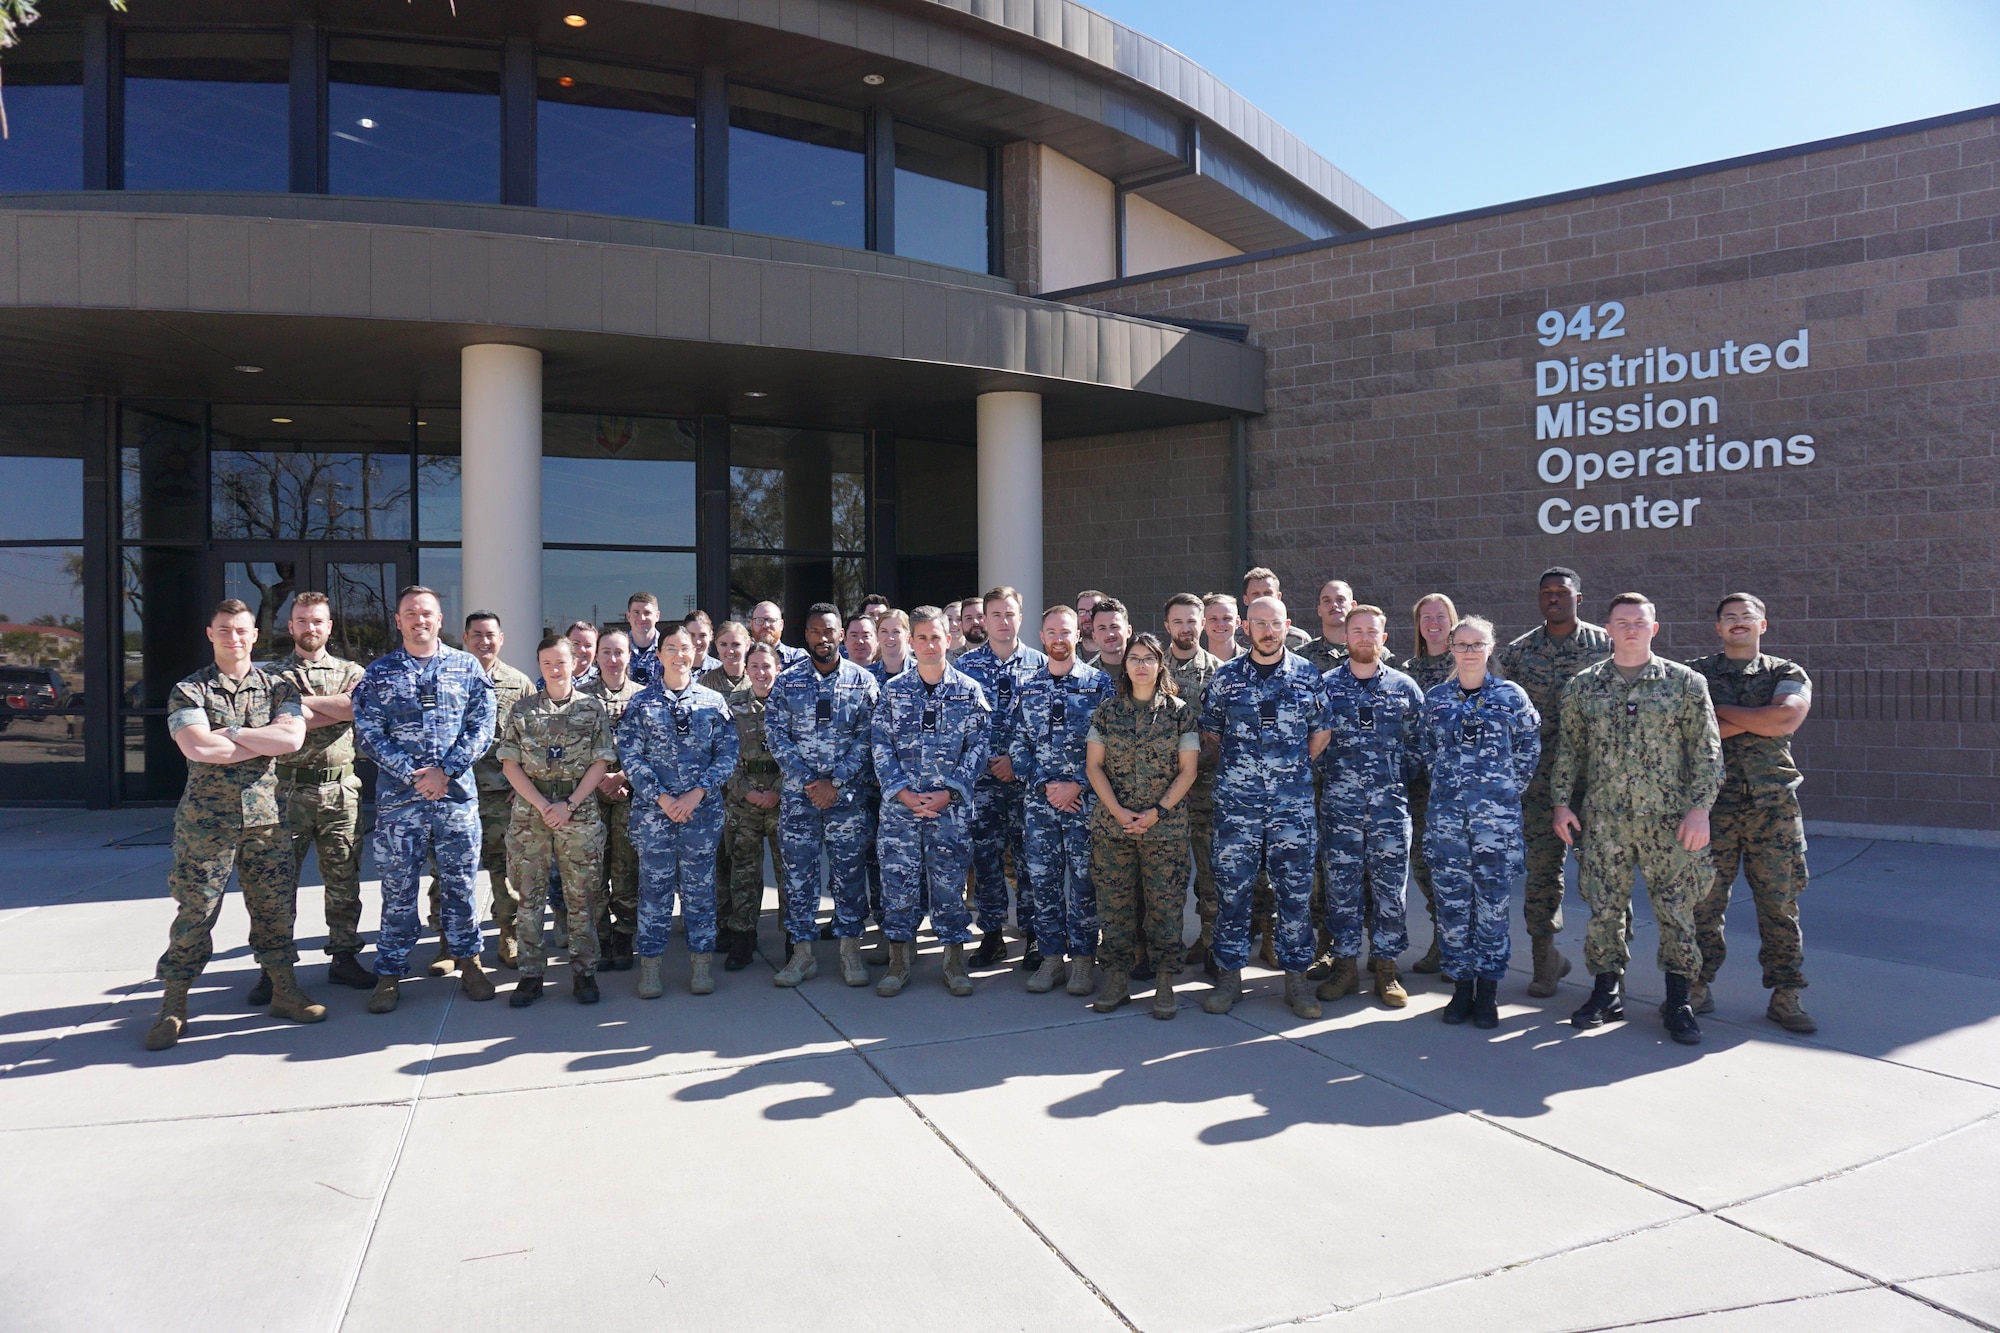 a large group of uniformed U.S., U.K. and Australian military members stand in front of brick building with lettering “942 Distributed Mission Operations Center”